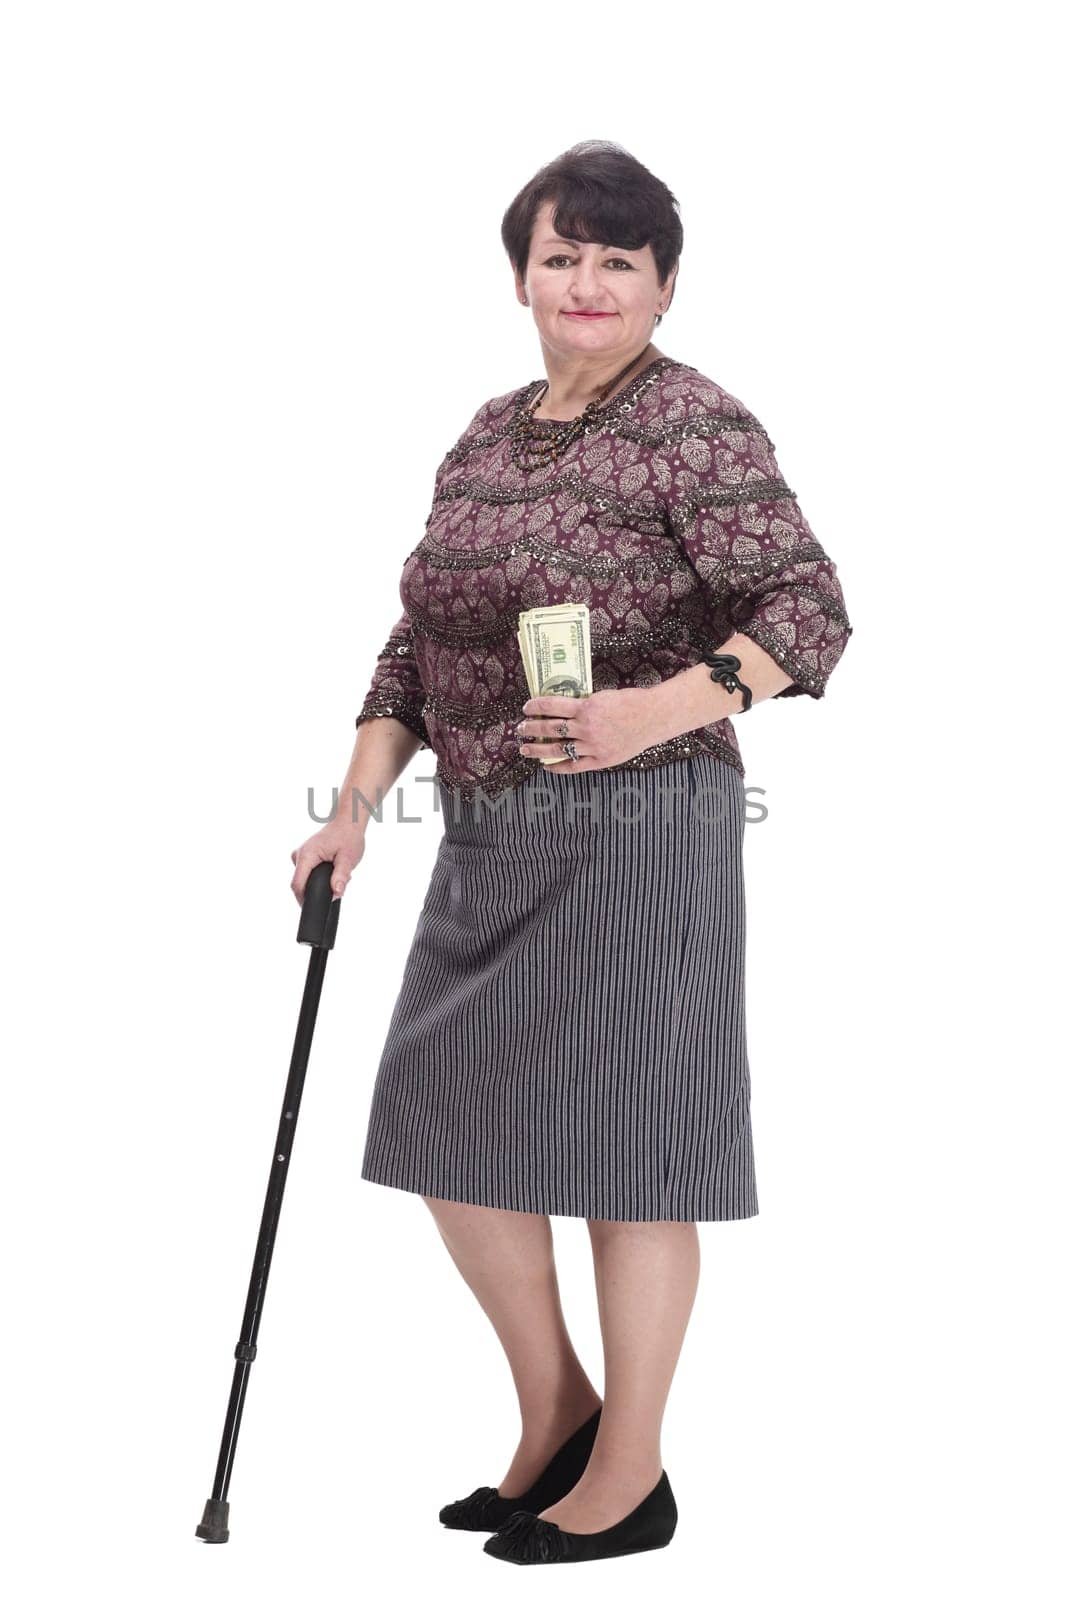 casual elderly woman with a fan of banknotes. by asdf